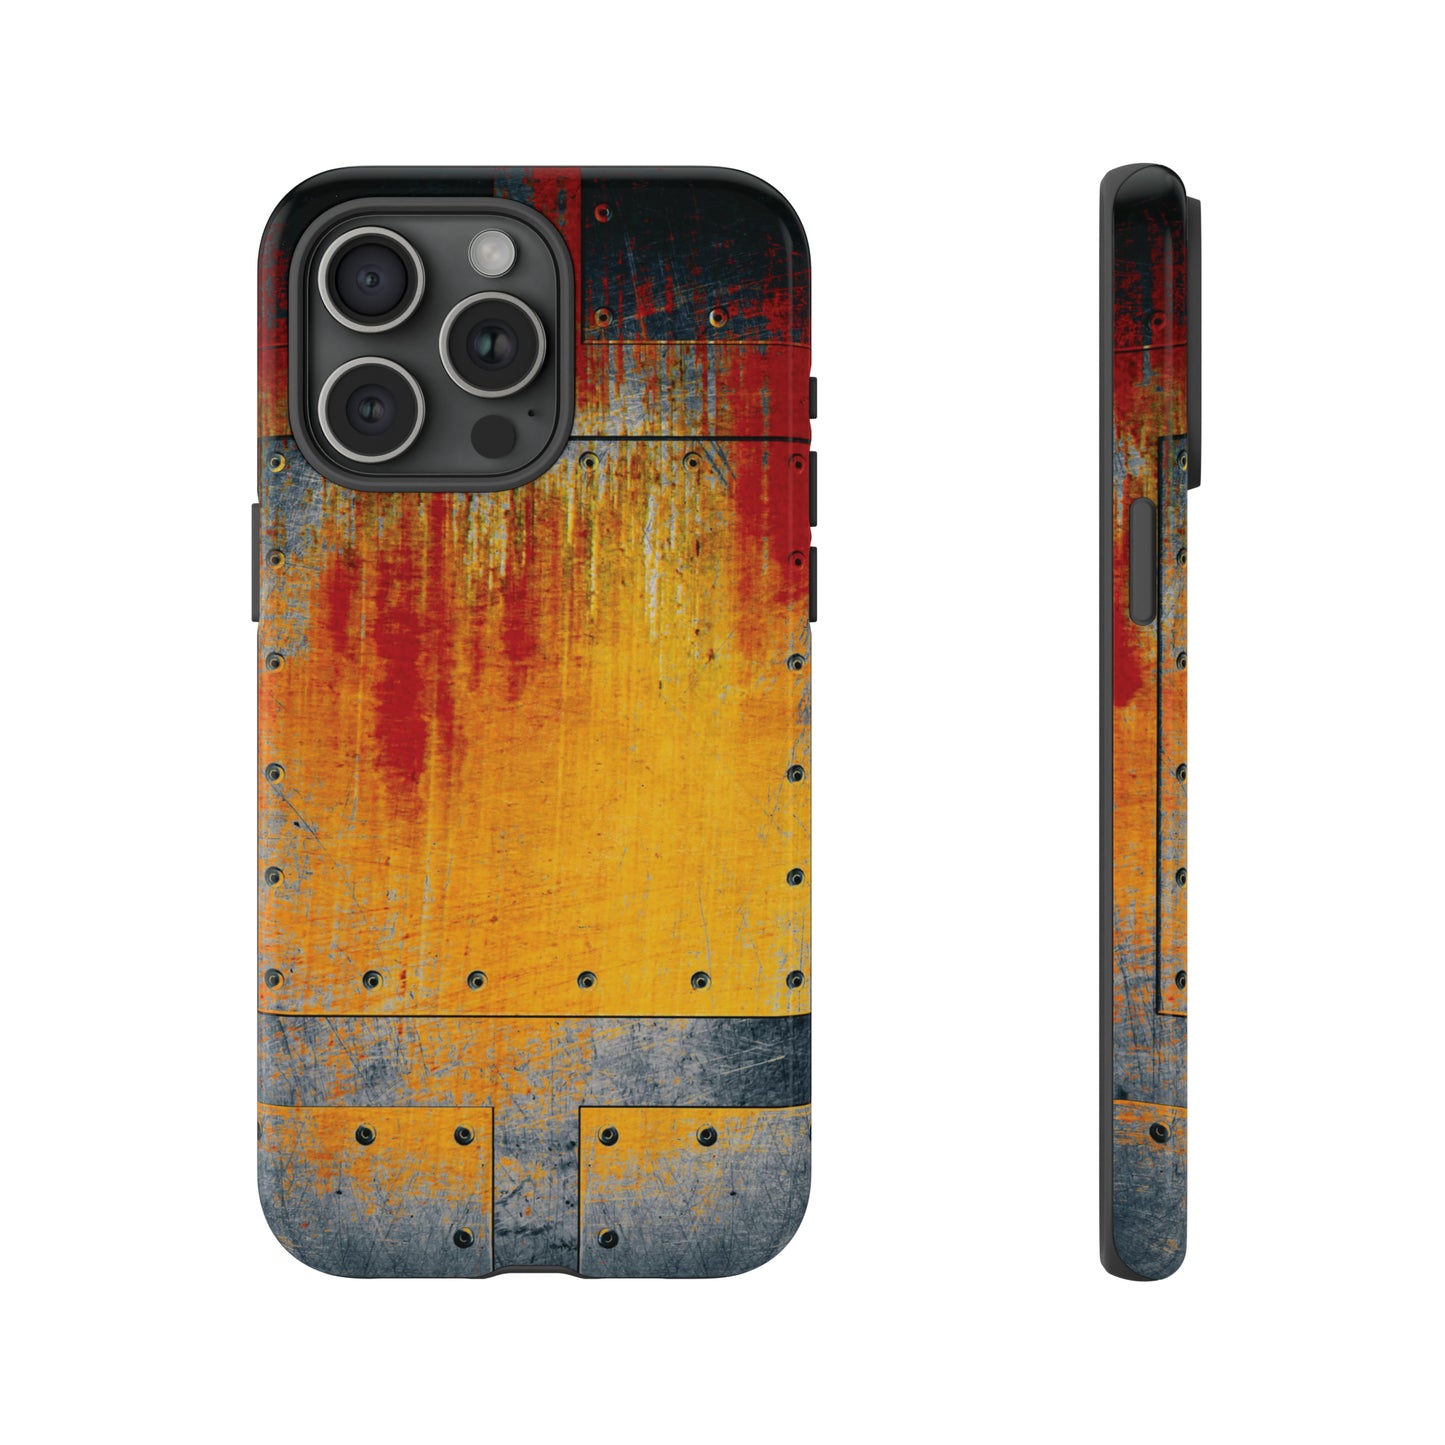 Steampunk Themed Rust and Paint Plate Printed on Phone Case for iPhone 15 Pro Max front and Side